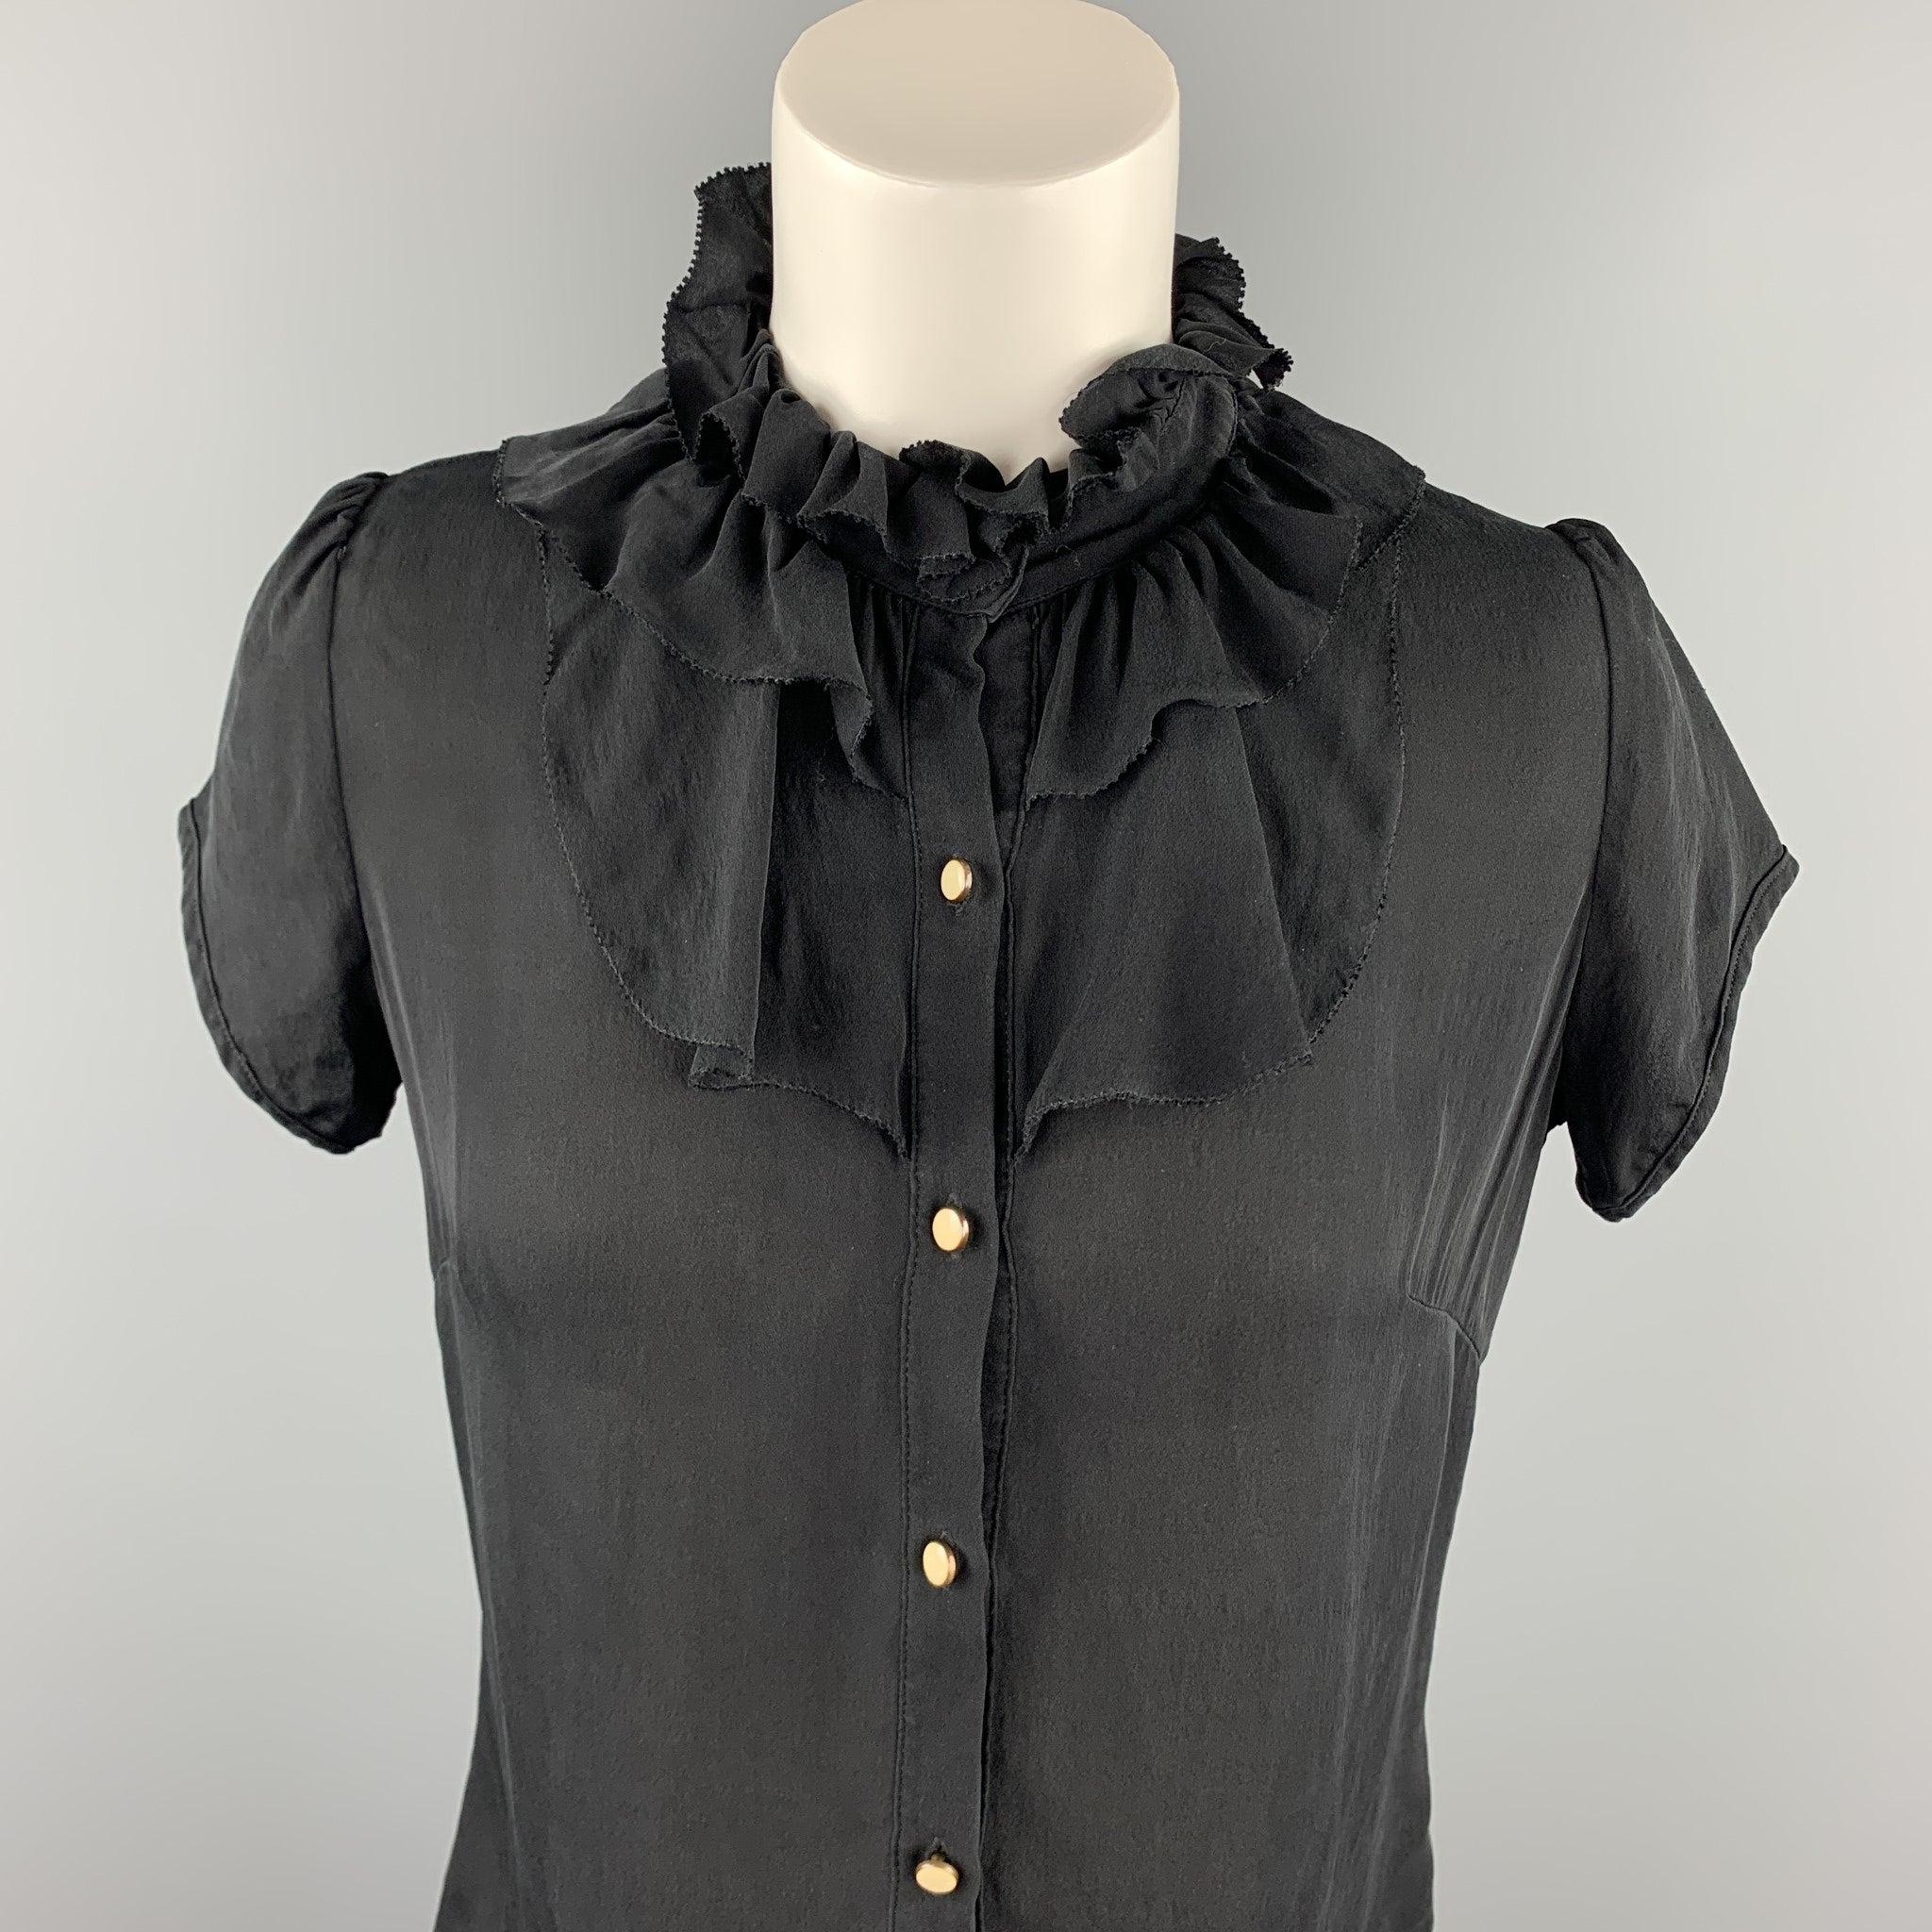 BARNEY'S NEW YORK blouse comes in a black silk featuring a front ruffled design and buttoned closure.
Very Good
Pre-Owned Condition. 

Marked:   2 

Measurements: 
 
Shoulder: 13.5 inches 
Bust: 34 inches 
Sleeve: 5.5 inches 
Length: 22 inches 
  
 